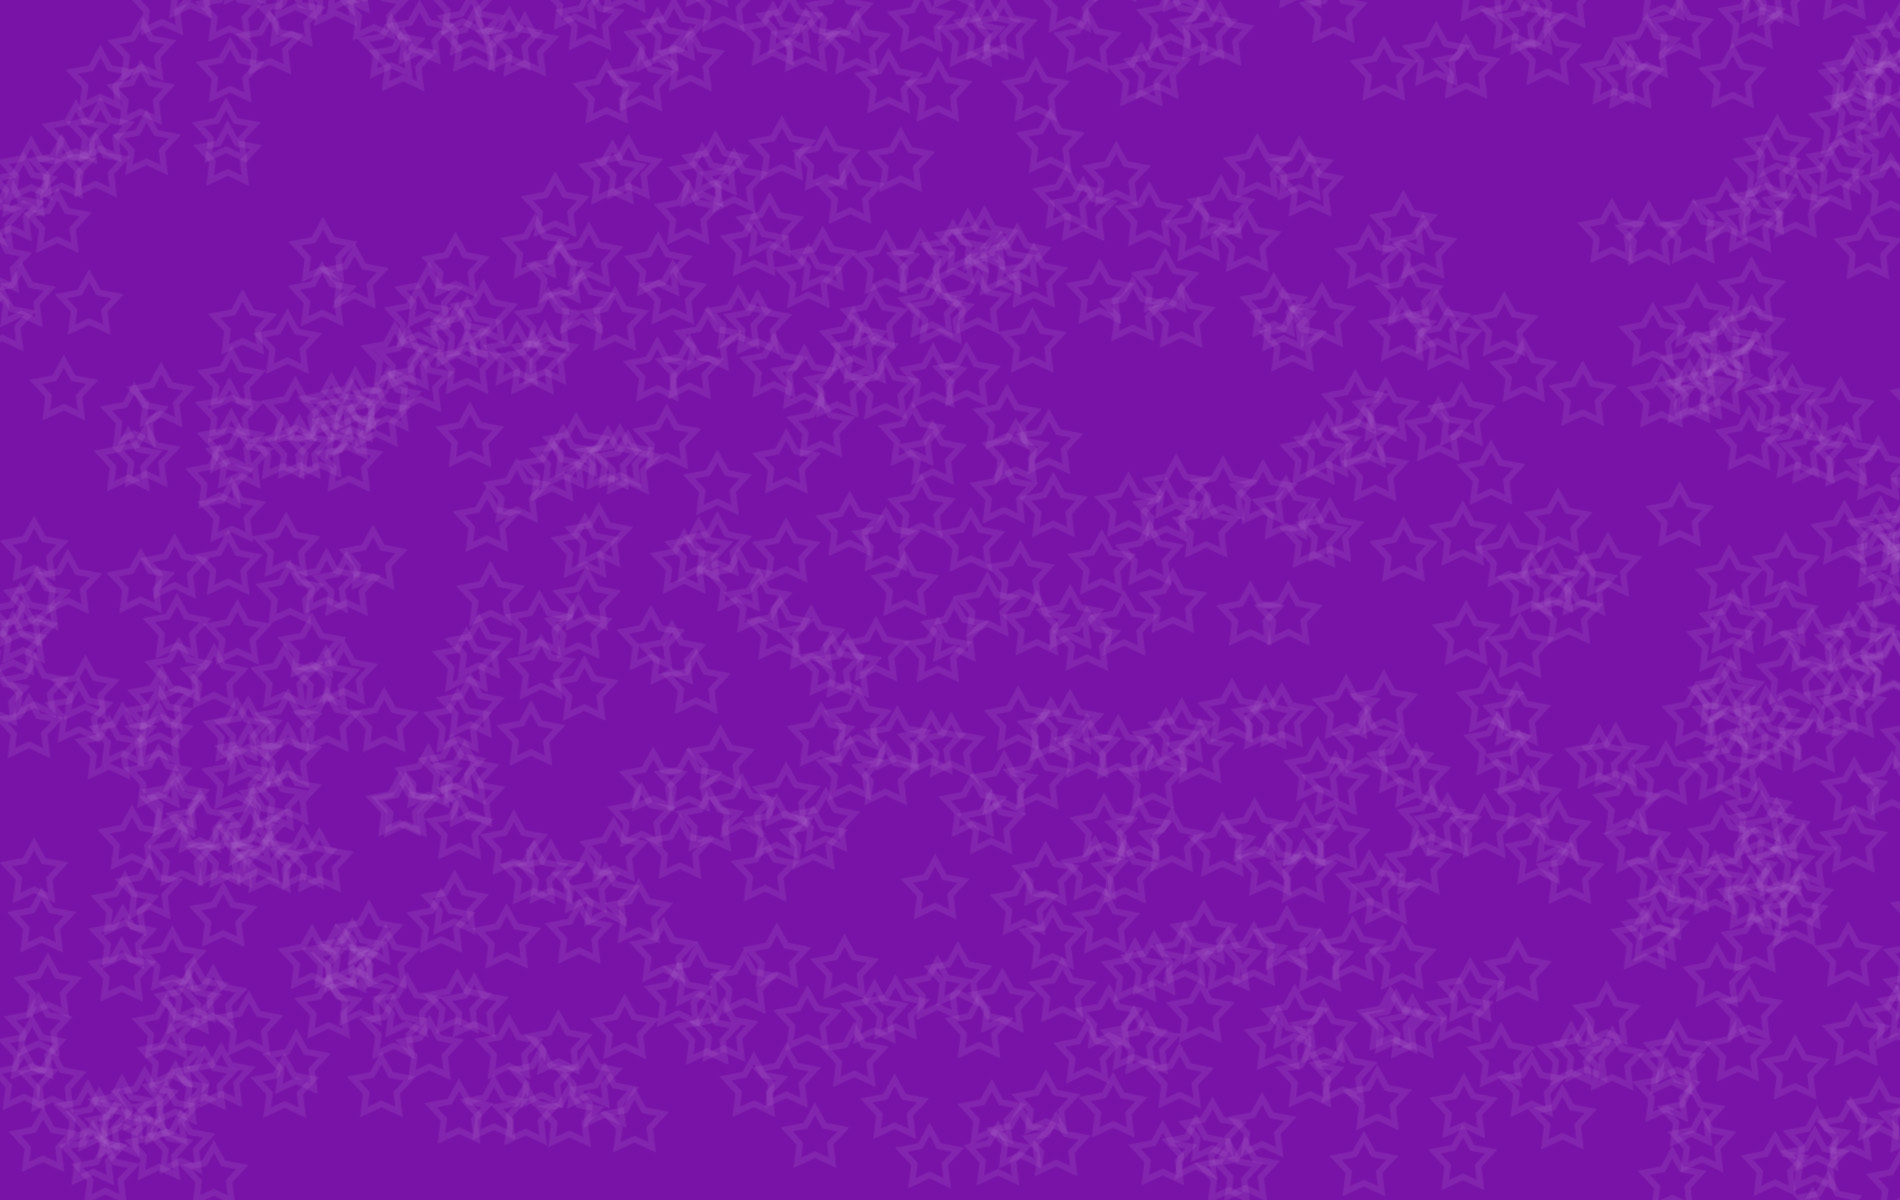 Abstract Purple Stars - Free high quality background pictures